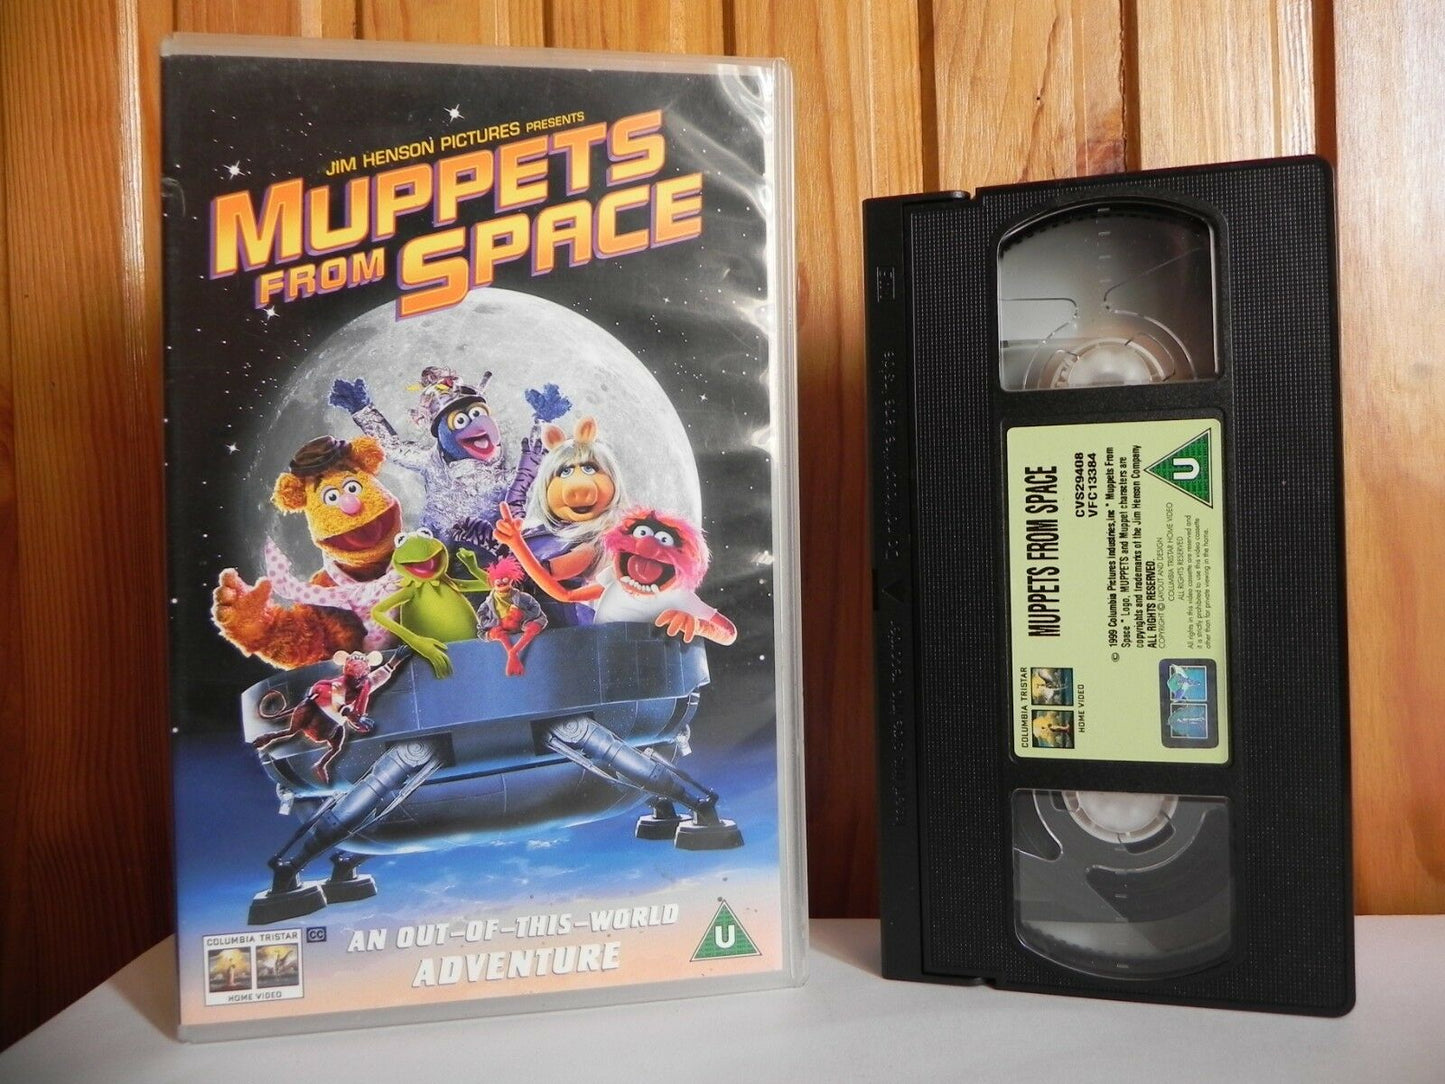 Muppets From Space - Large Box - Columbia - Comedy - Musical - Jim Henson - VHS-